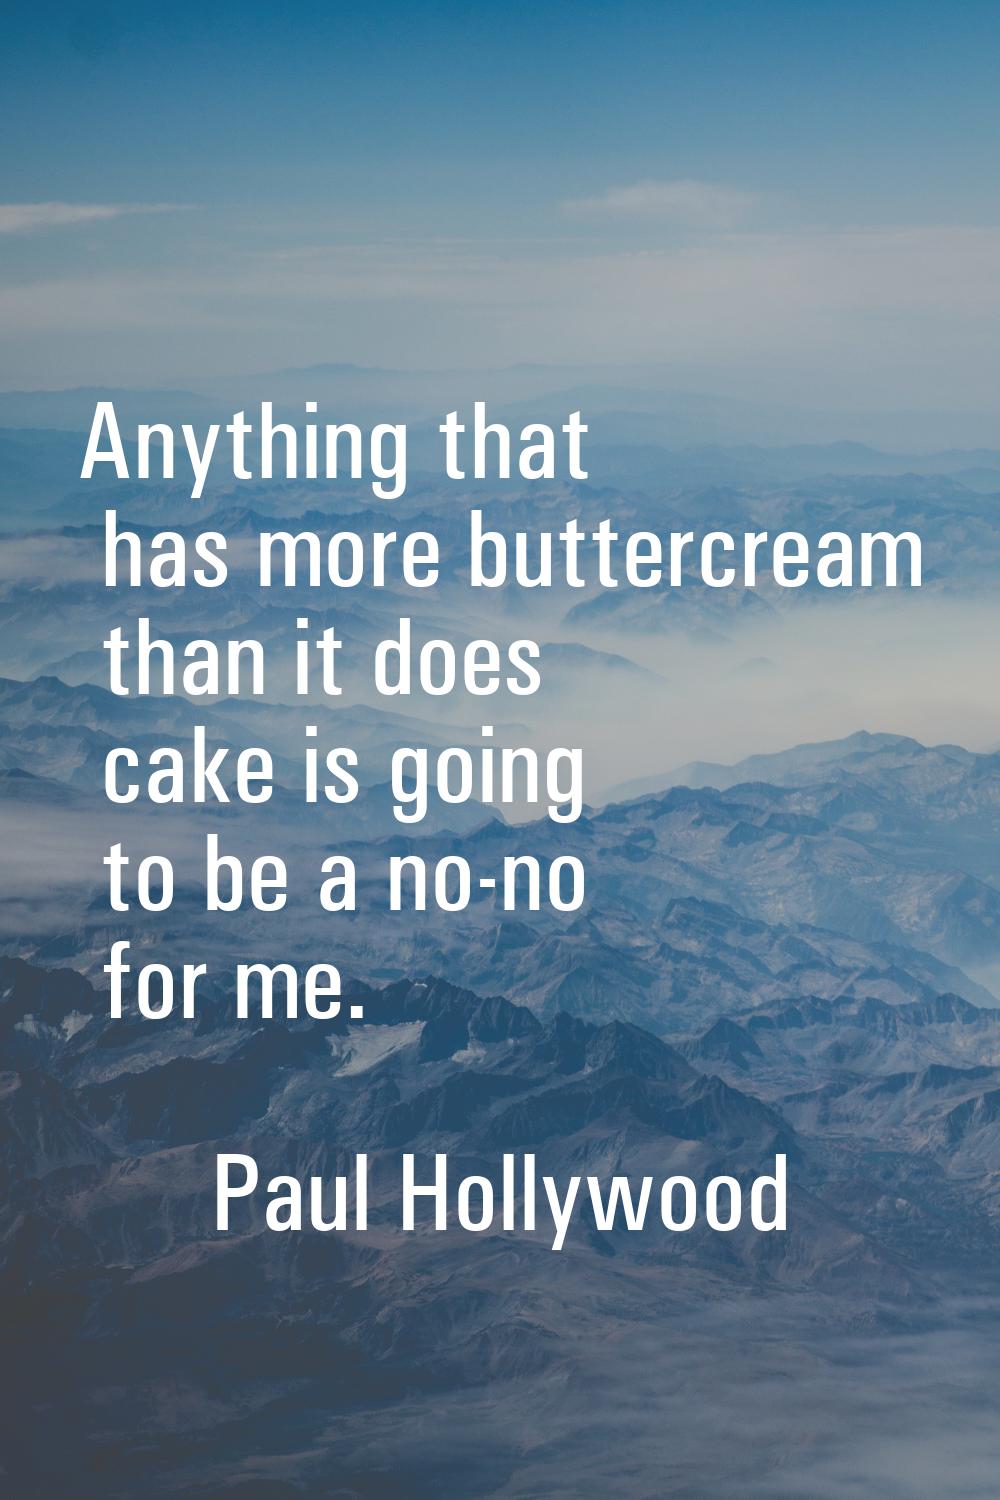 Anything that has more buttercream than it does cake is going to be a no-no for me.